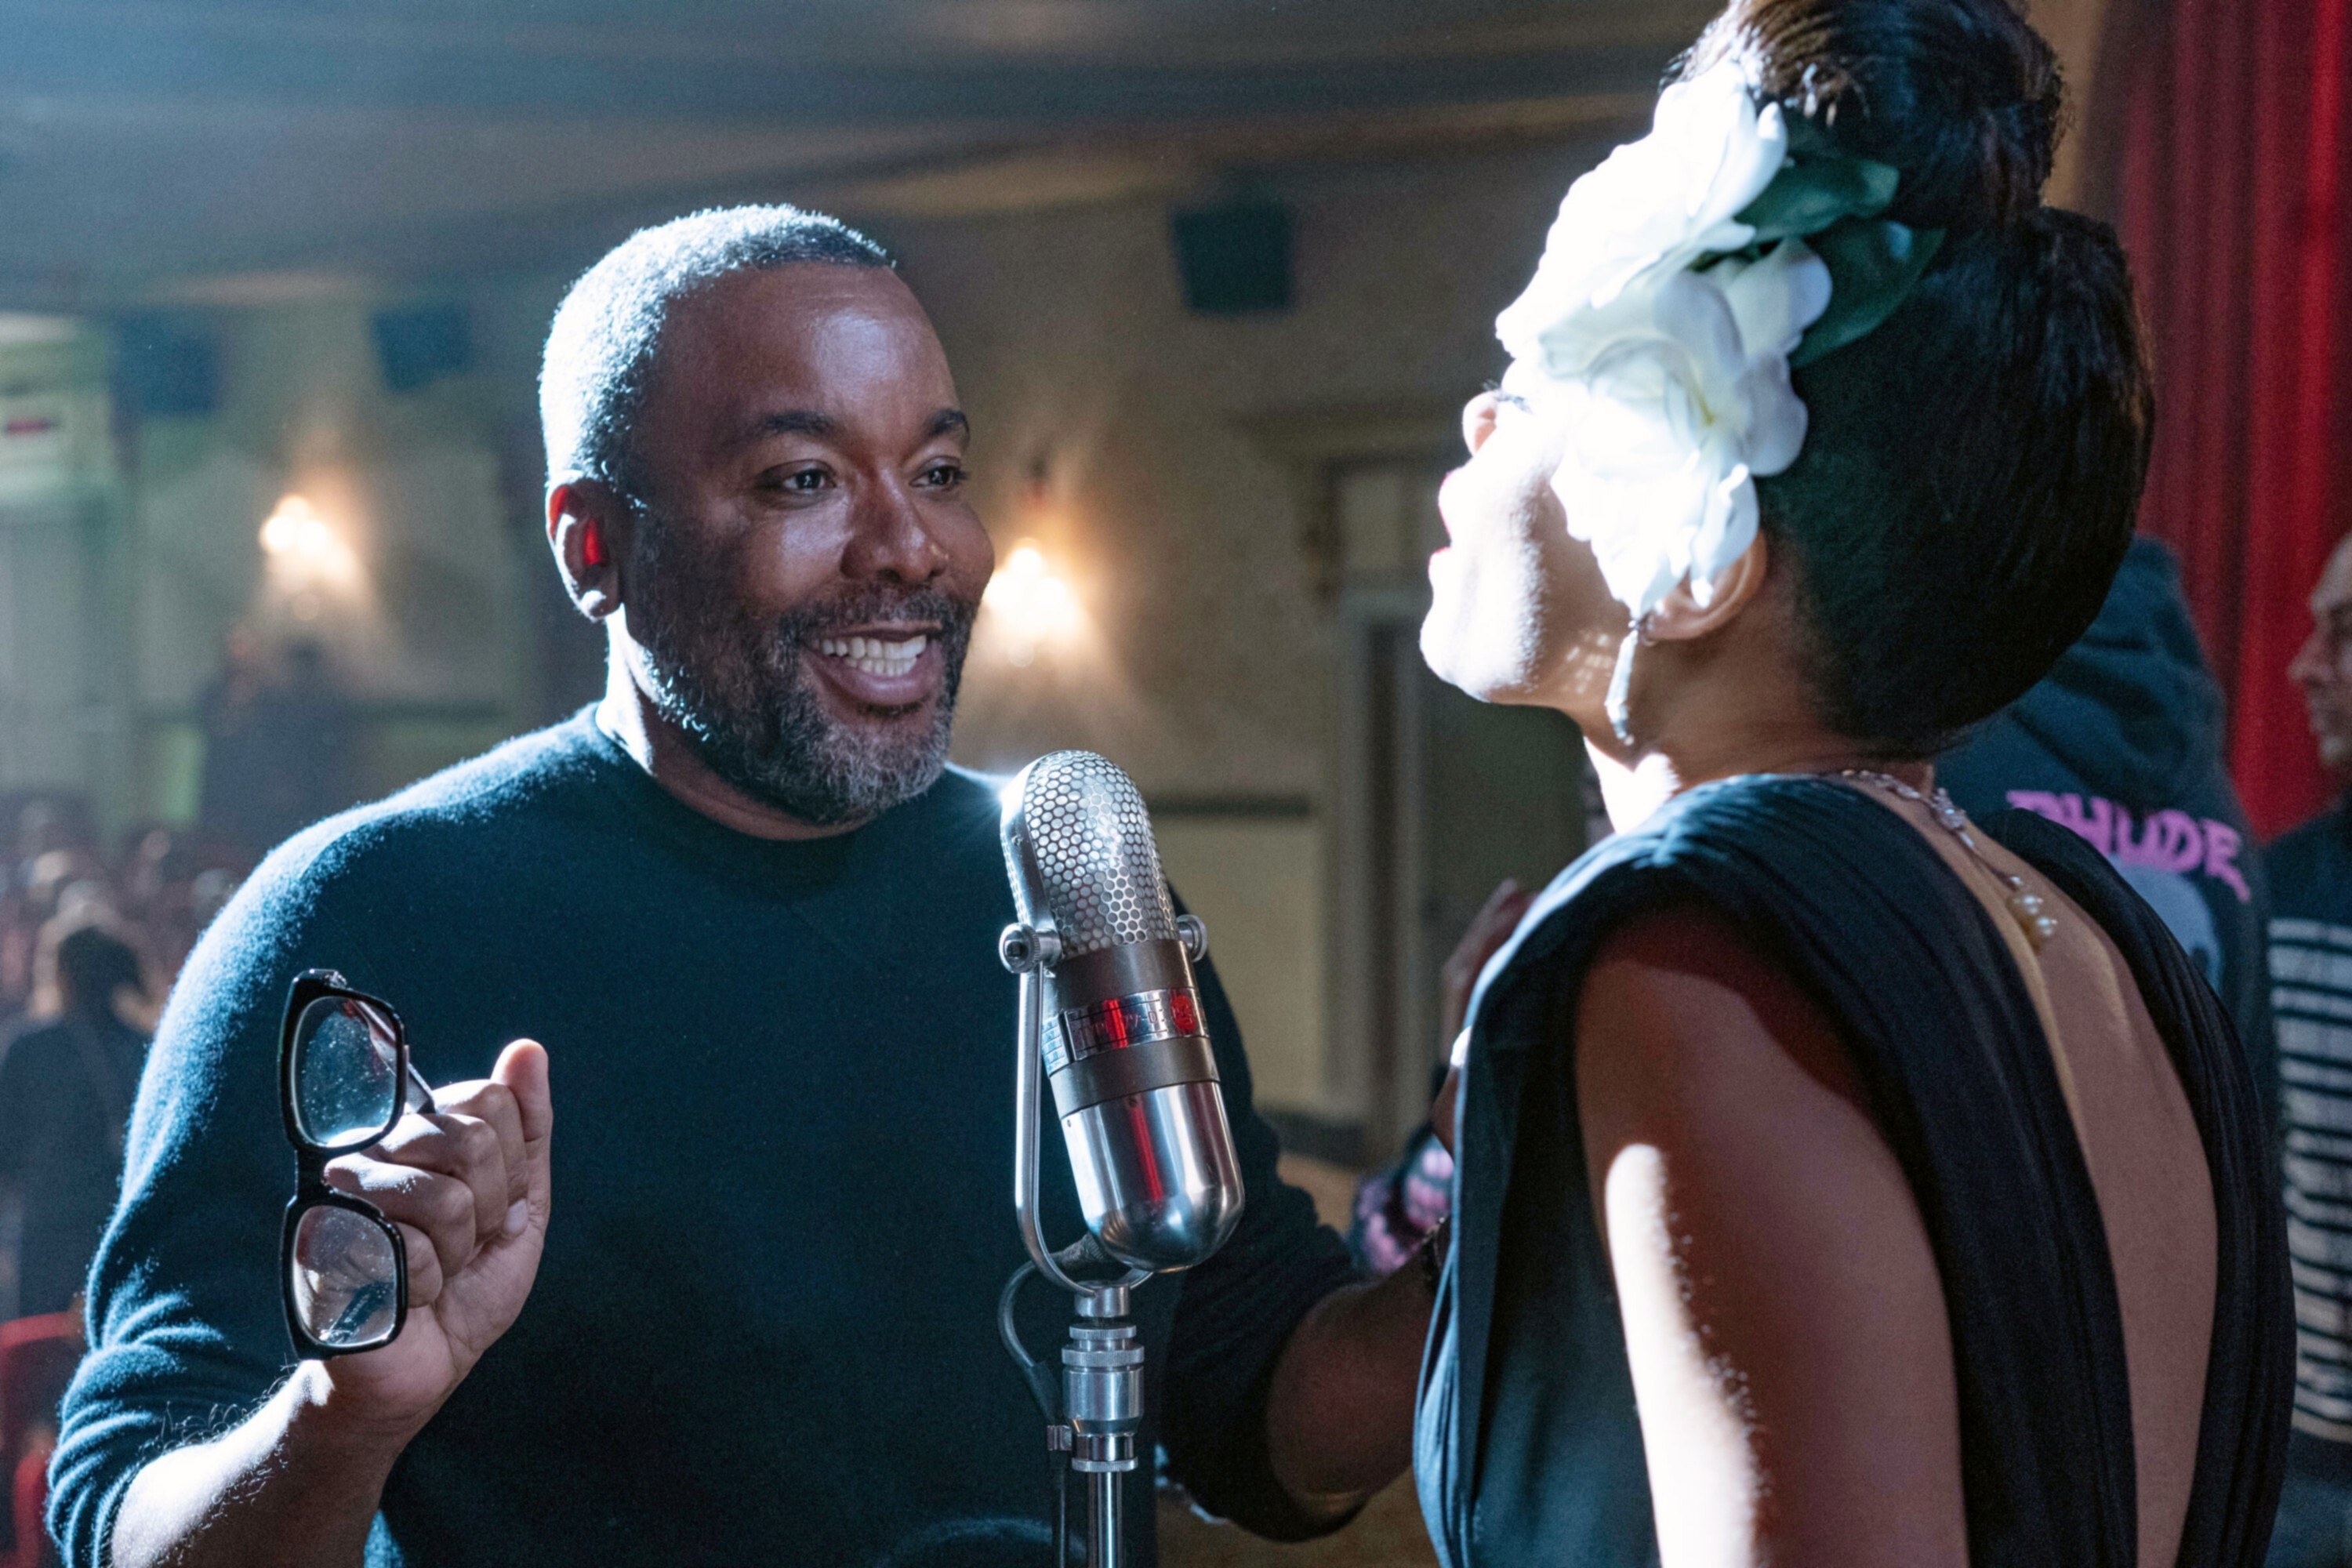 THE UNITED STATES VS. BILLIE HOLIDAY, from left: director Lee Daniels, Andra Day, on set